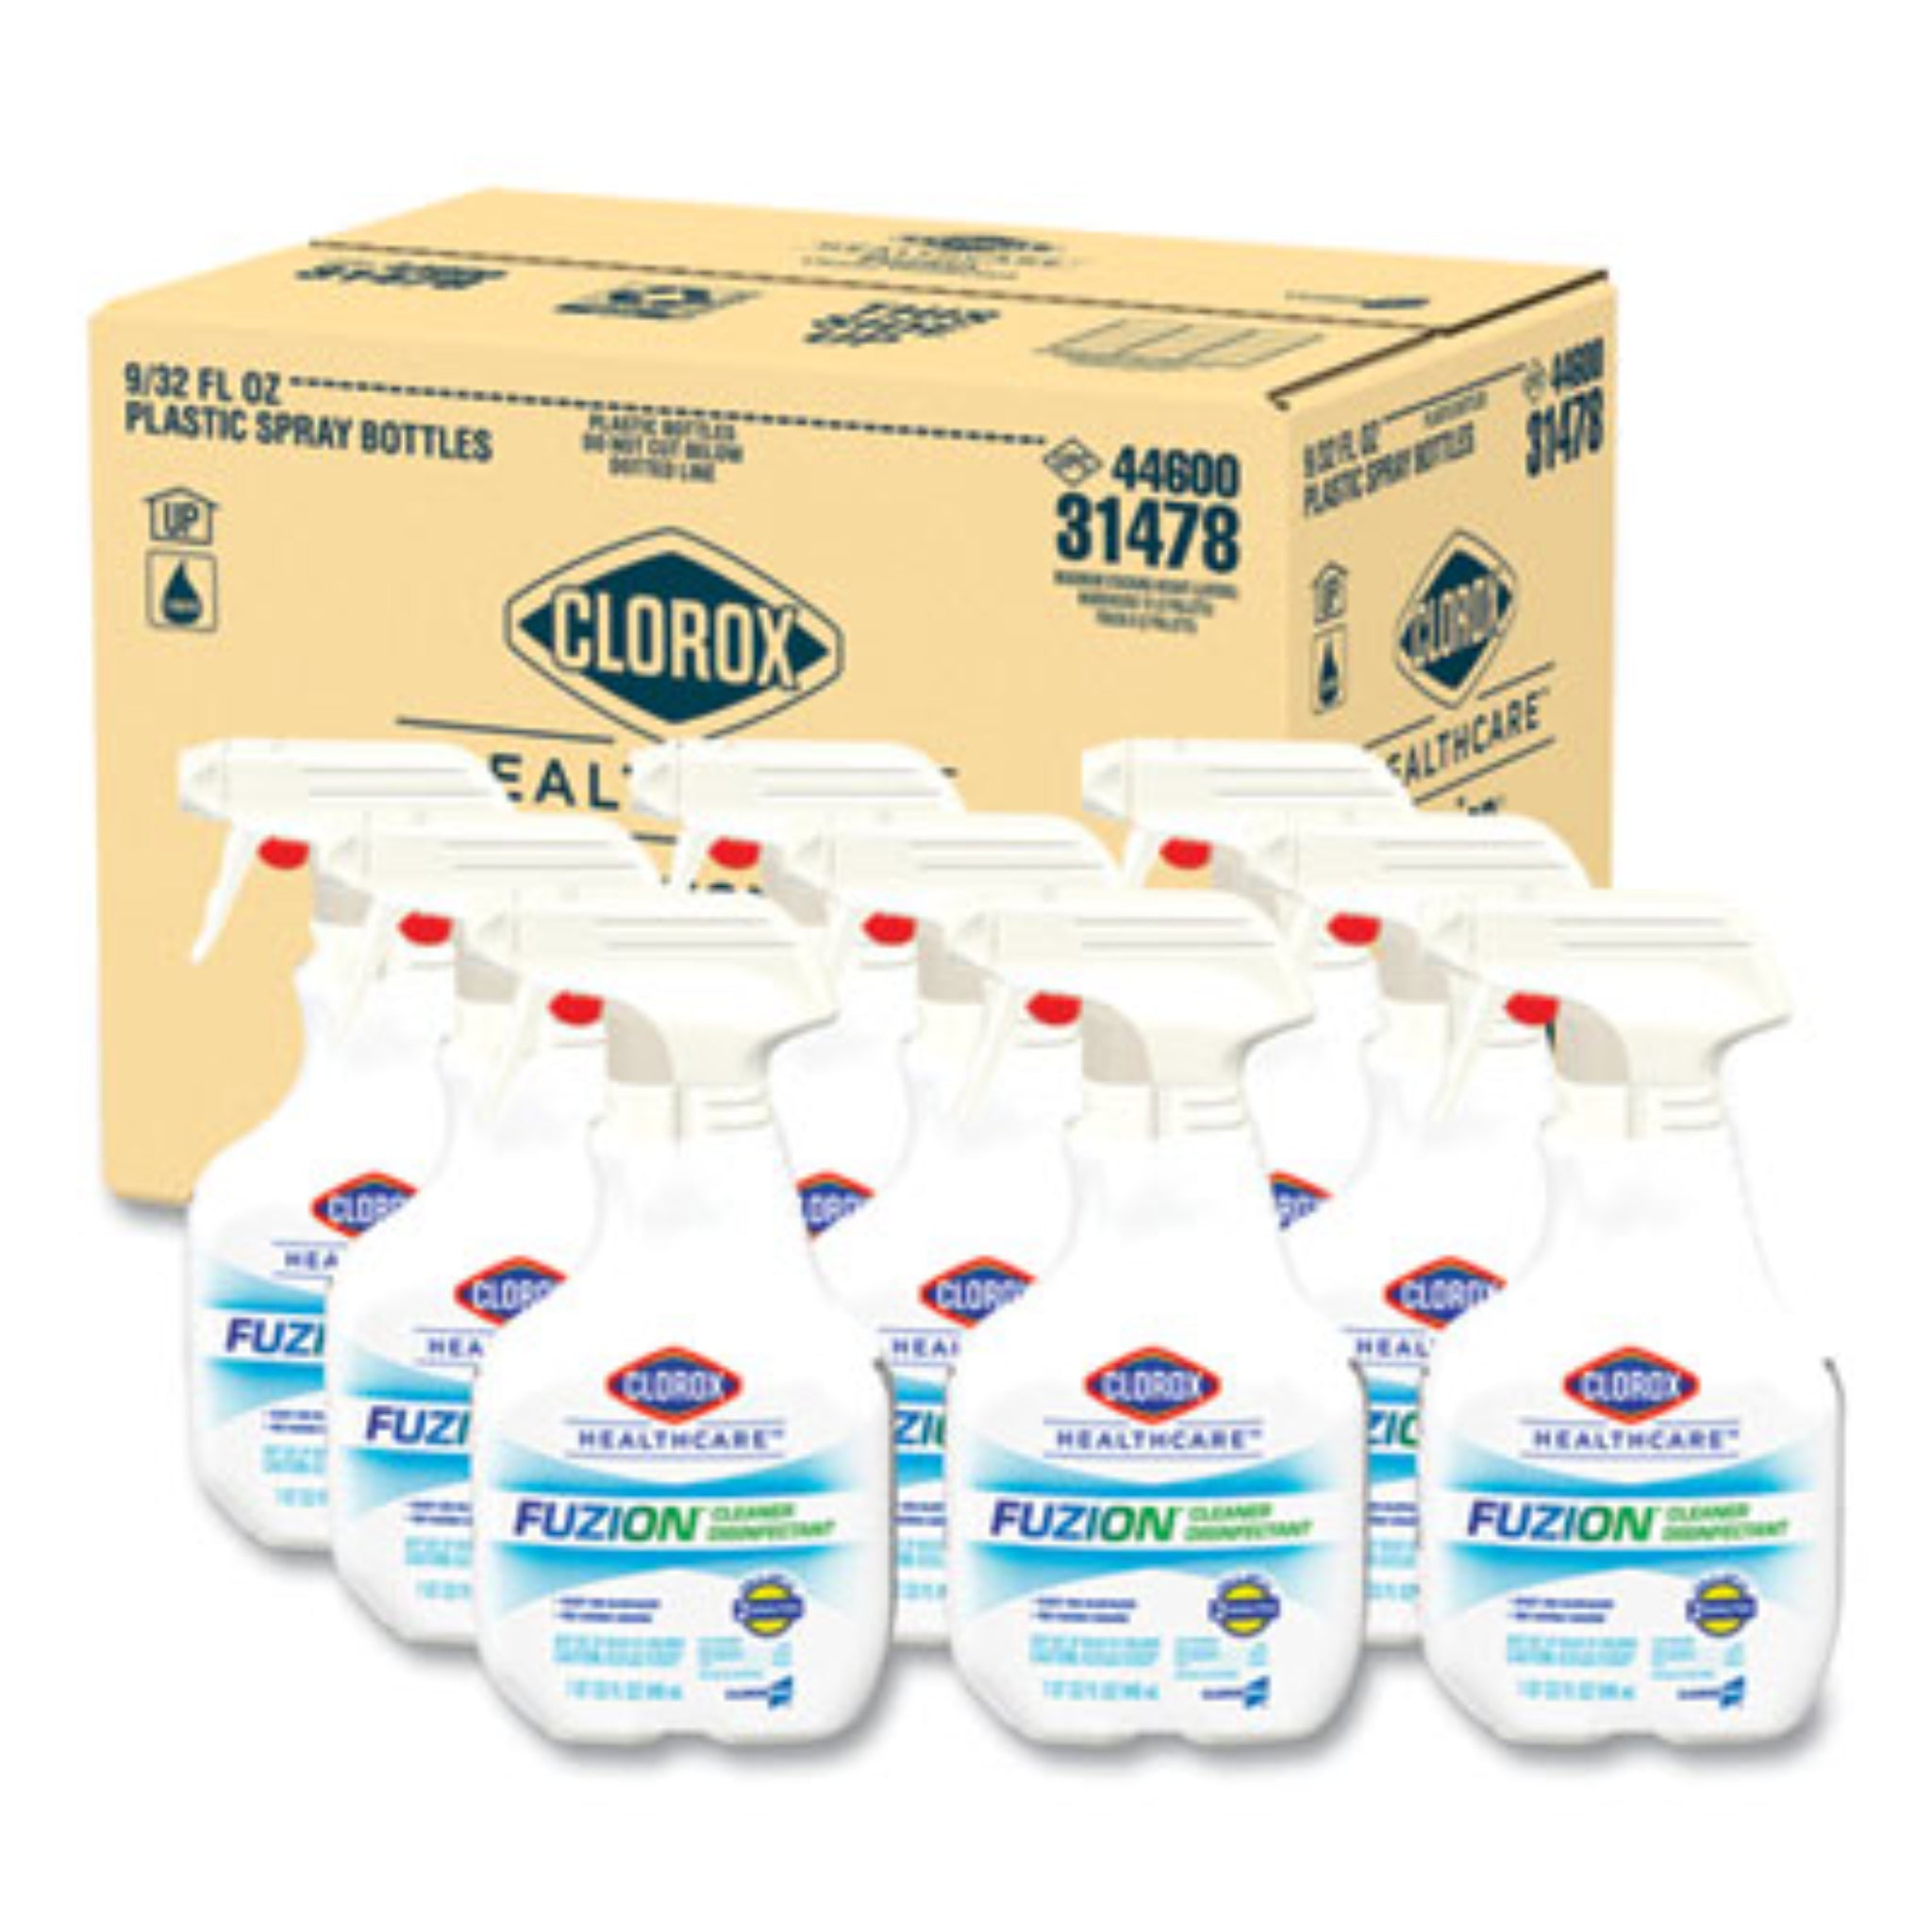 CLOROX SALES CO. CLO31478 Fuzion Cleaner Disinfectant, Unscented, 32 Oz Spray Bottle, Carton of 9